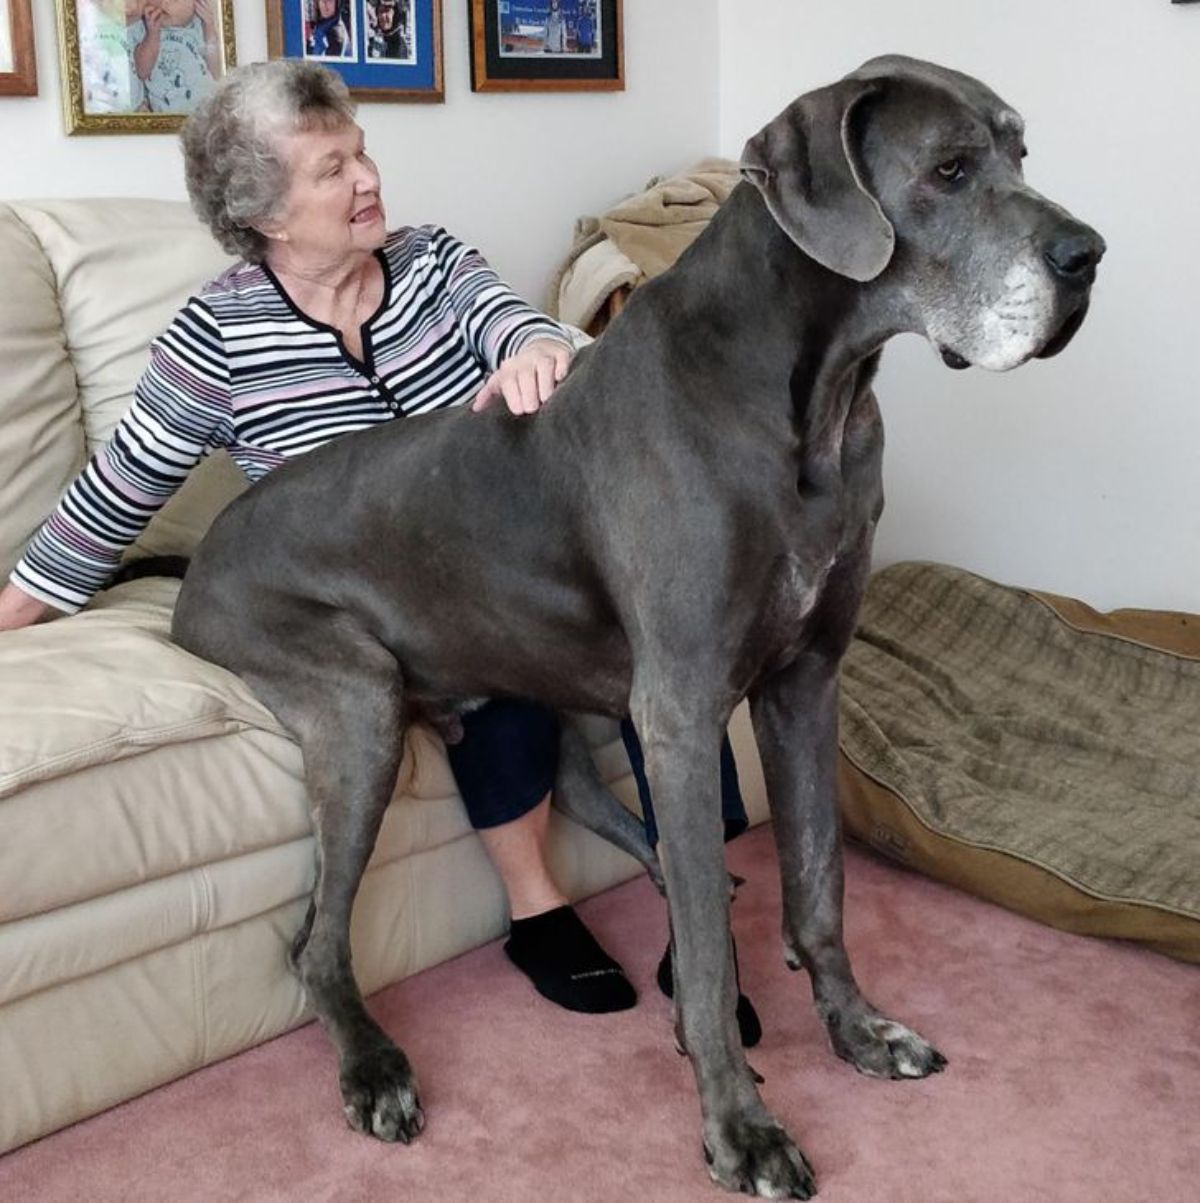 old grey great dane sitting on a beige sofa with the legs resting on the floor and a woman is sitting on the sofa next to the dog